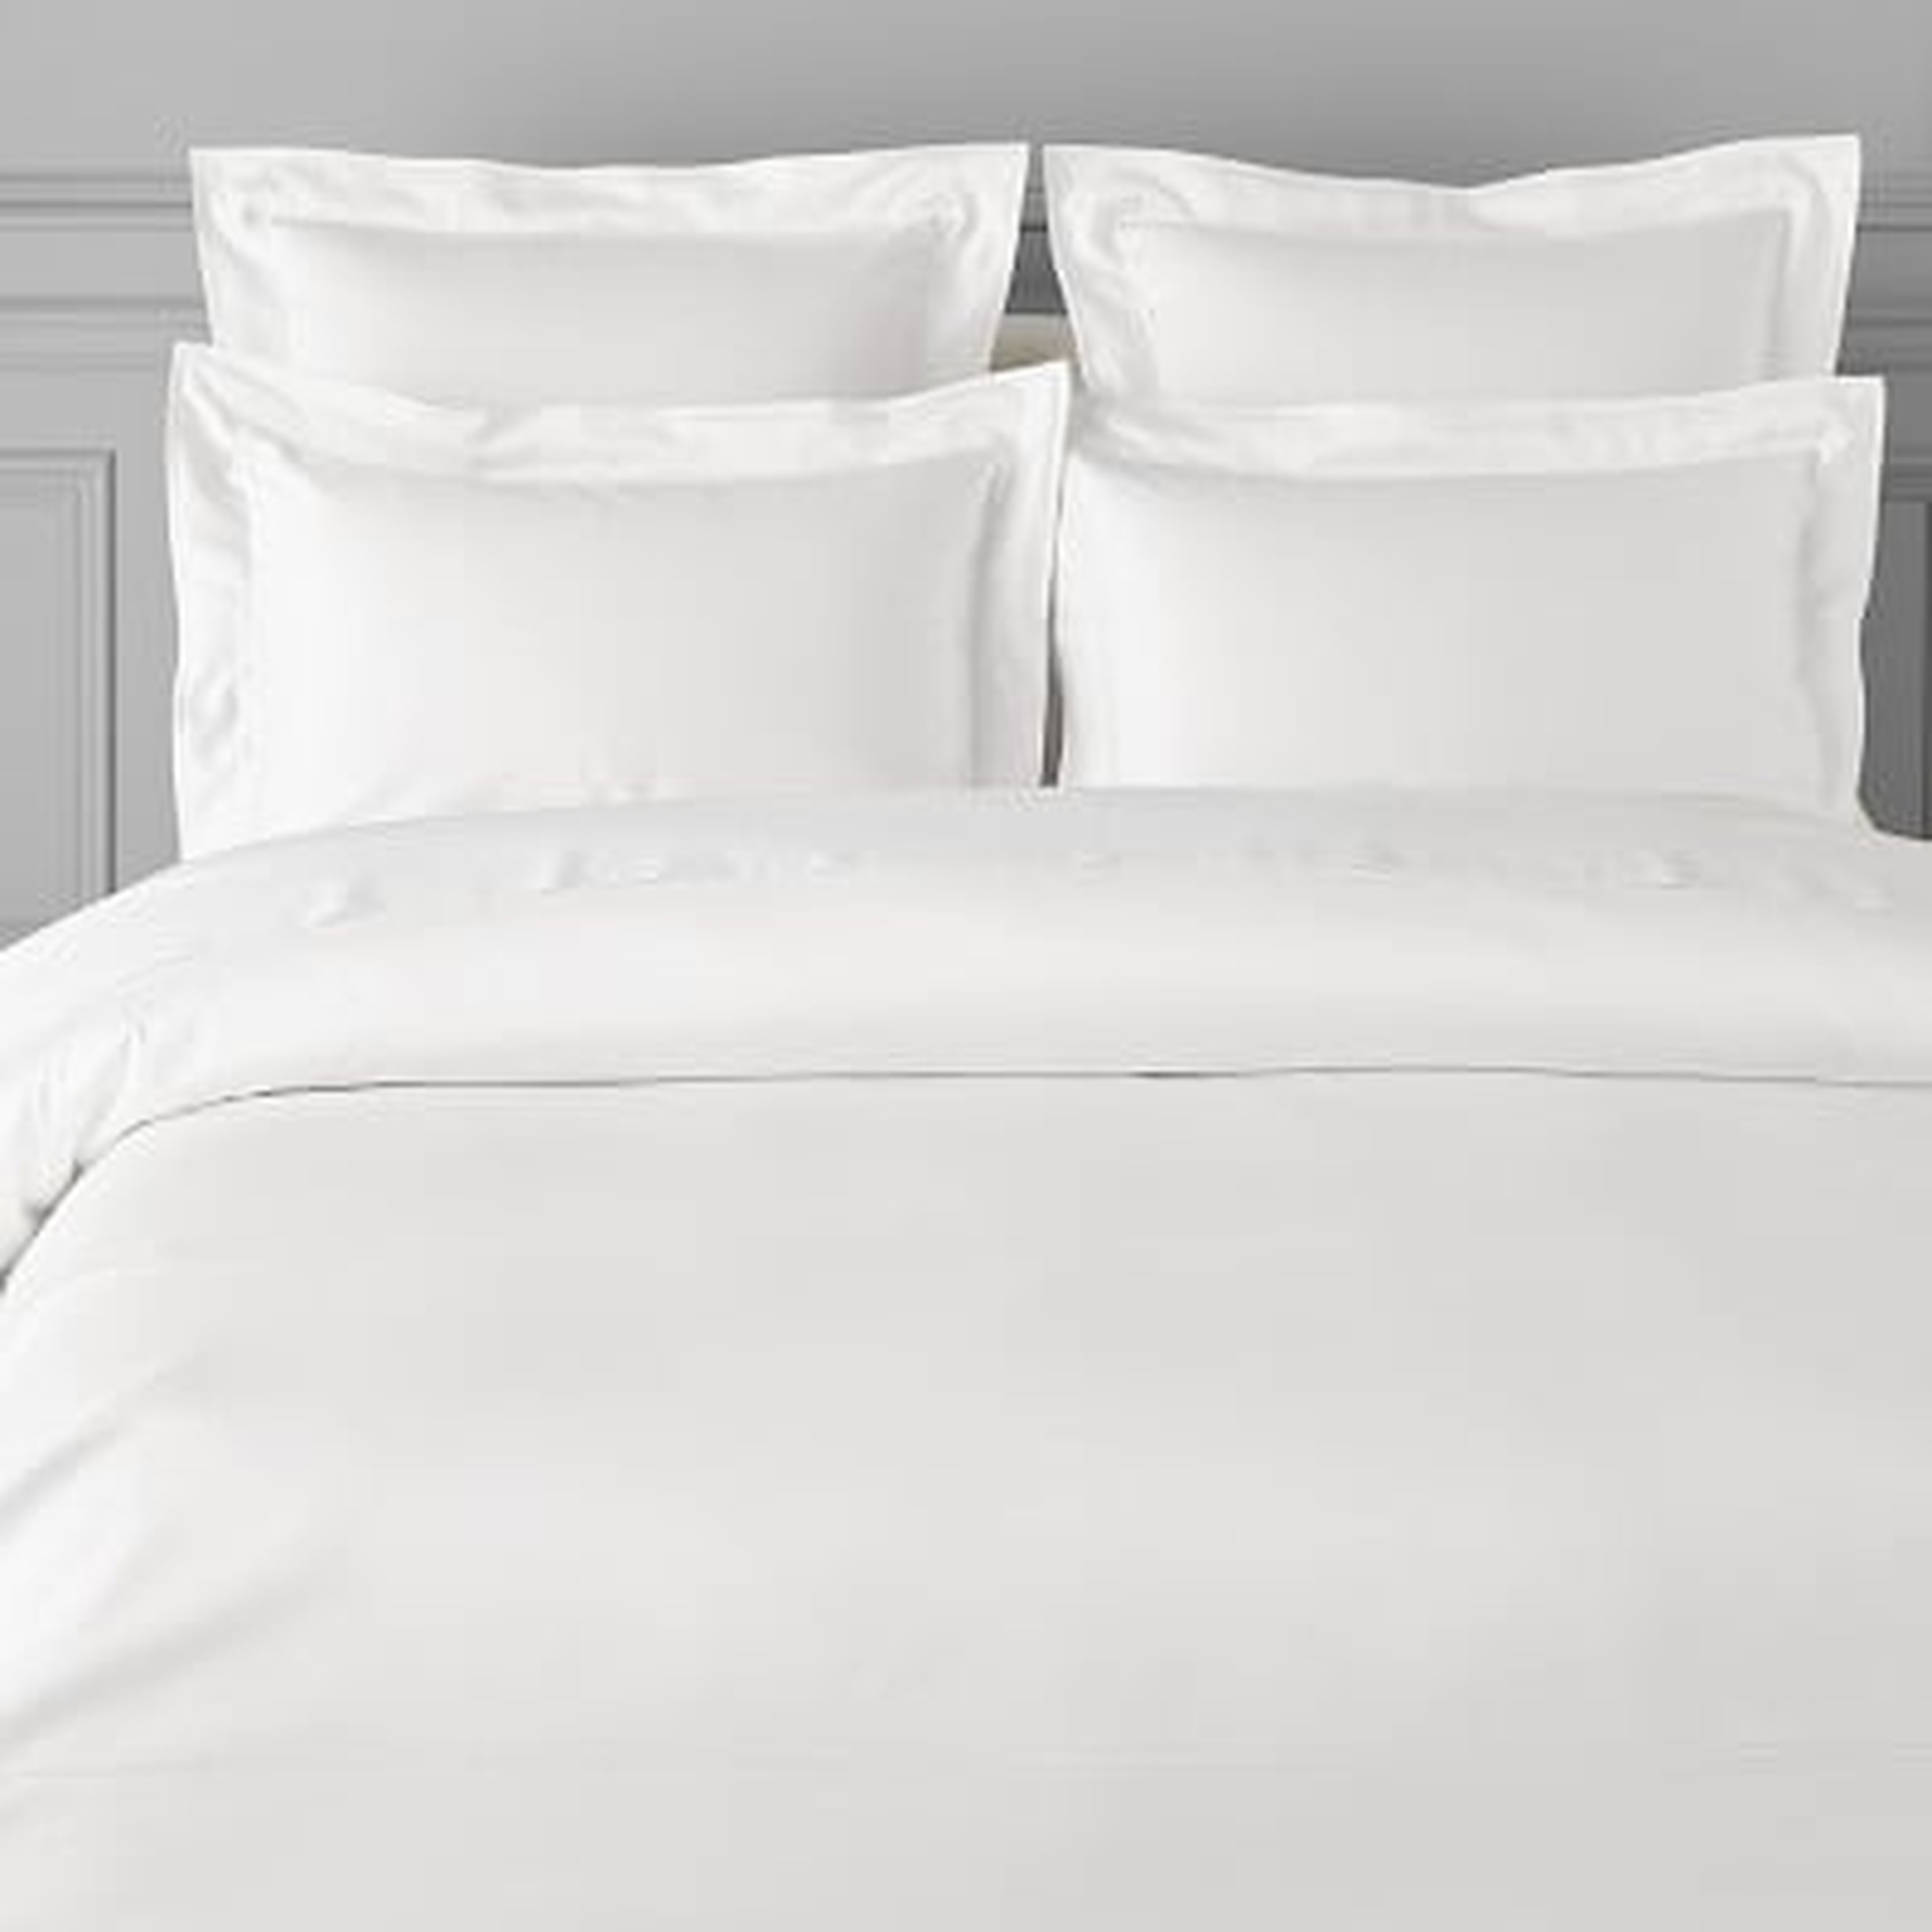 Chambers(R) 600 Thread Count Sateen Duvet Cover, King/Cal King, White - Williams Sonoma